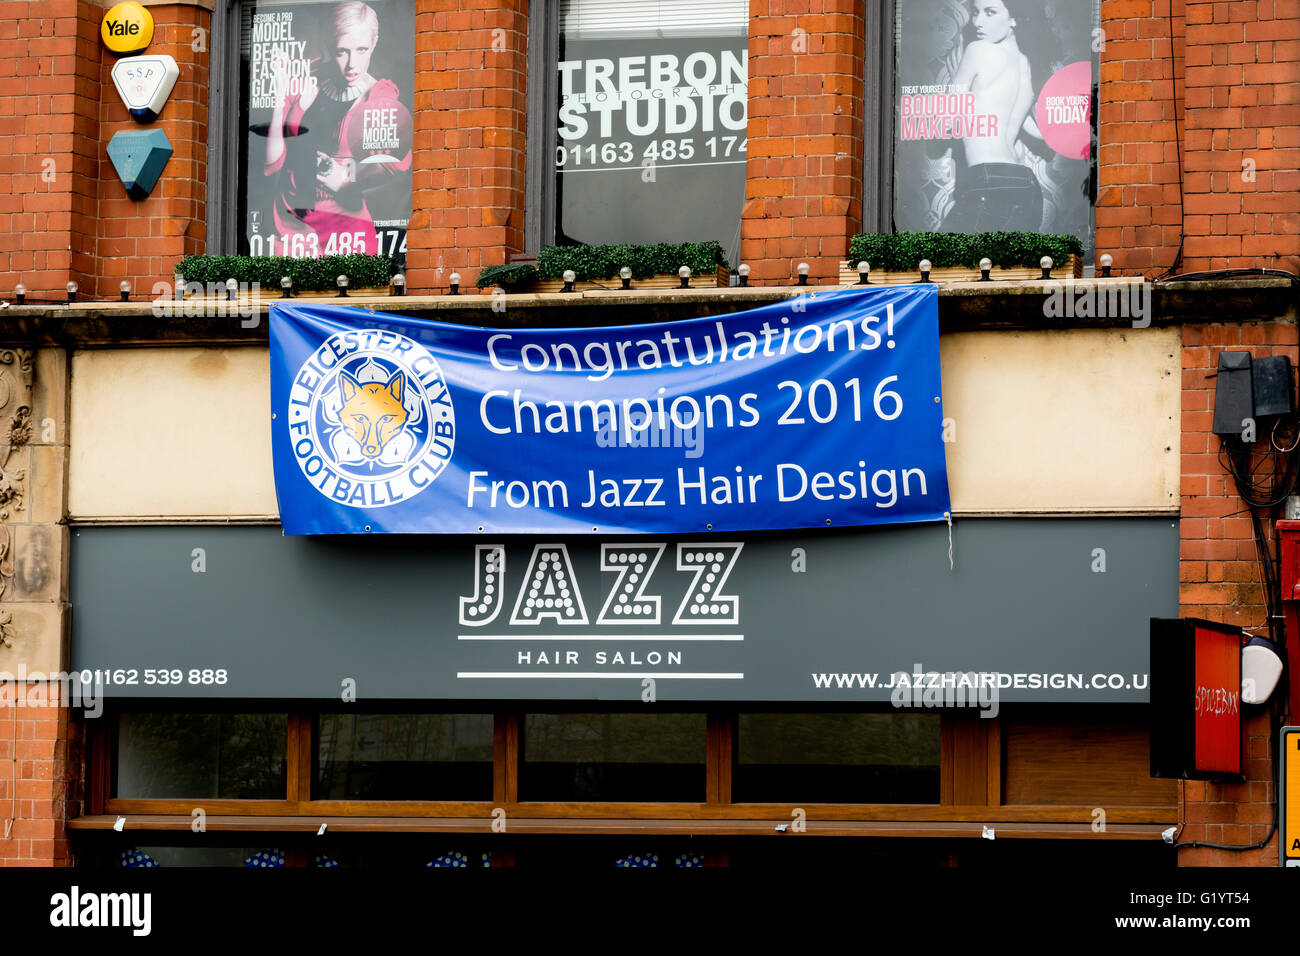 Leicester City Football Club champions banner, Leicester city centre, UK Stock Photo